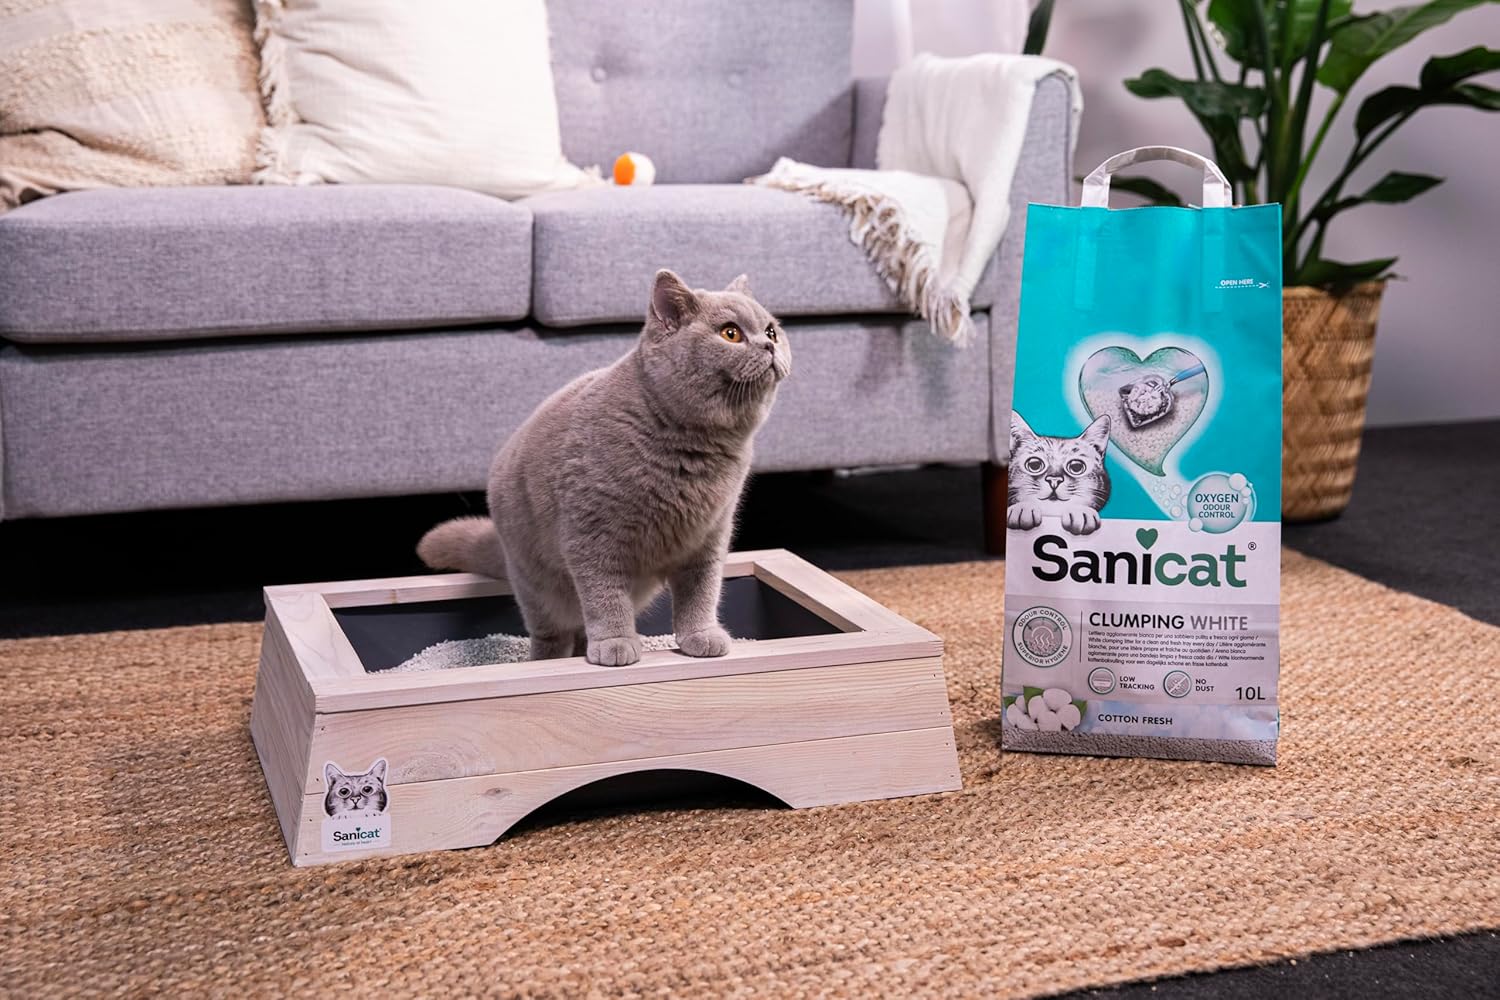 Sanicat - White - Cotton Fresh Ultra Clumping cat litter | Made of natural minerals with guaranteed odour control | Absorbs moisture and makes cleaning easier | 10 L capacity :Pet Supplies